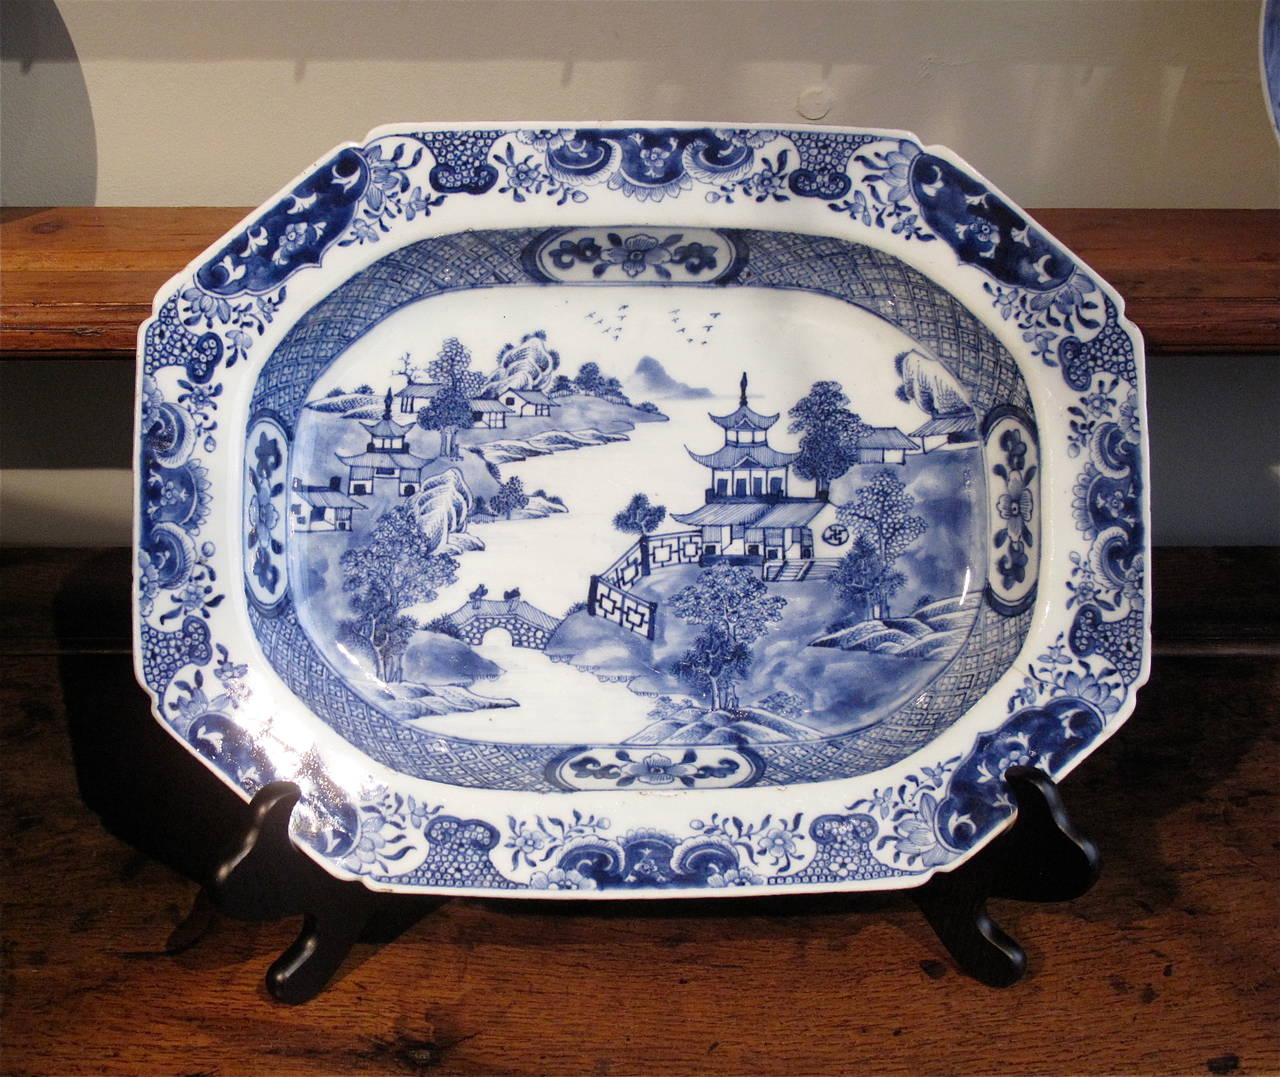 An early 19th century (ca. 1800-1820) blue and white serving dish with shaped edges decorated with a flower and reserve border over a diaper pattern recess surrounding a traditional detailed Nanking tea house scene.